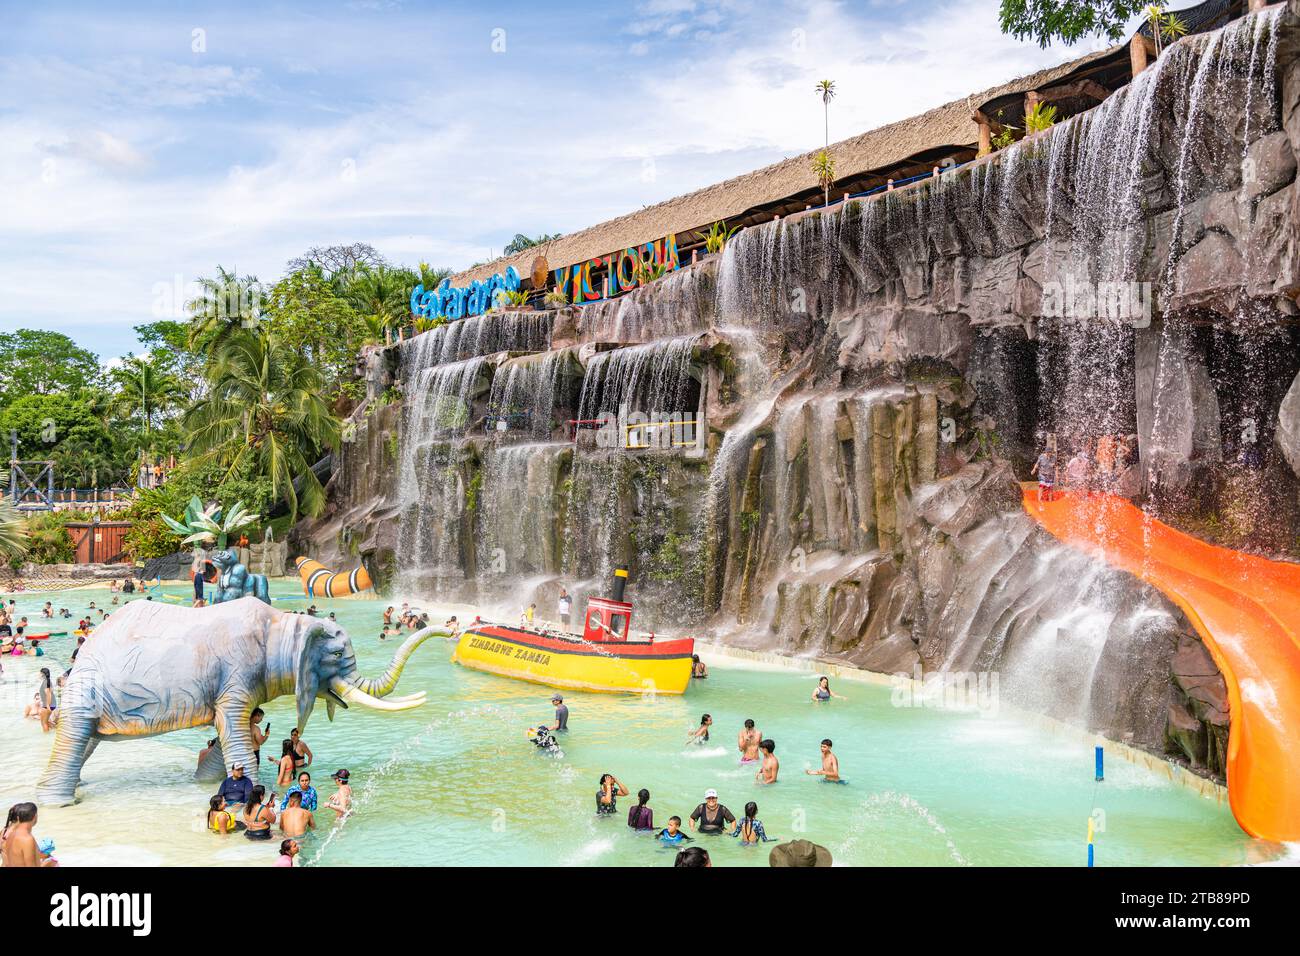 People at the water park at Hacienda Napoles in Colombia Stock Photo